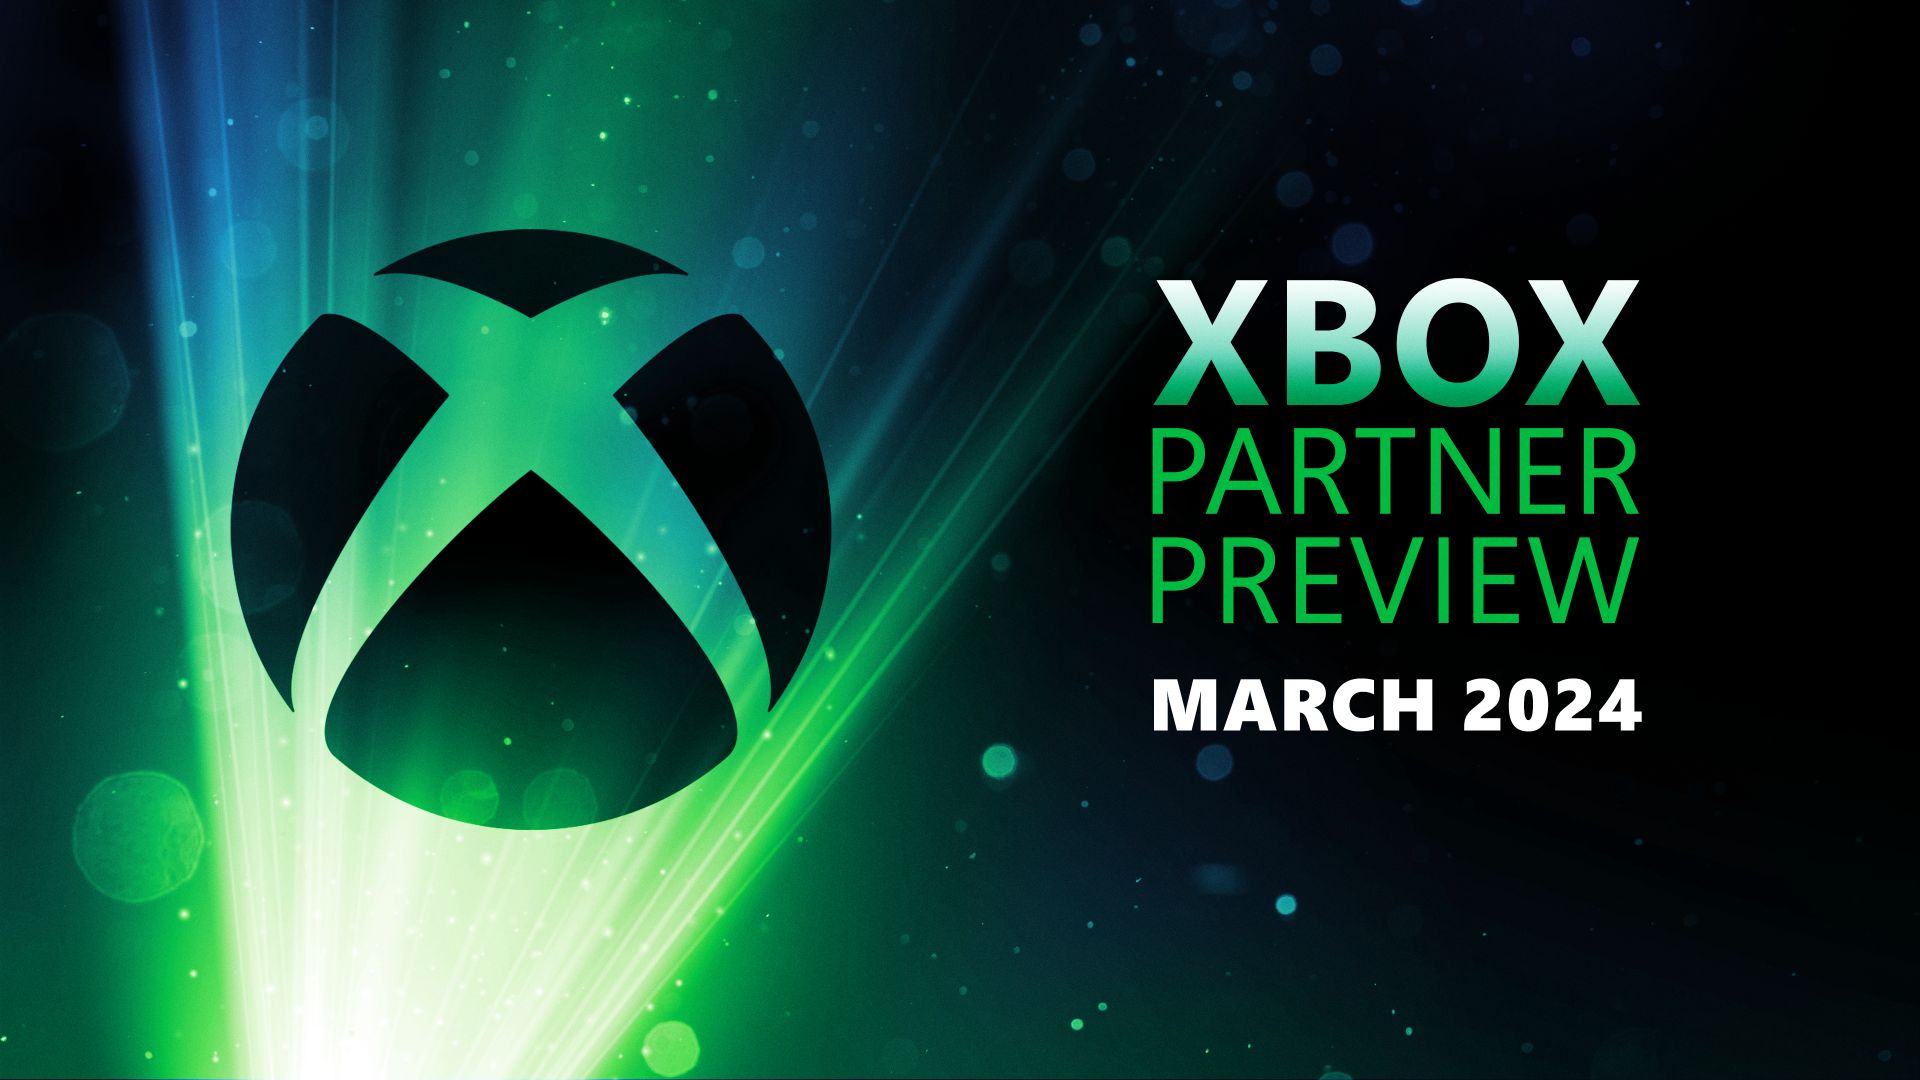 Microsoft's Xbox Partner Preview Showcases Upcoming Games and Exclusive Releases